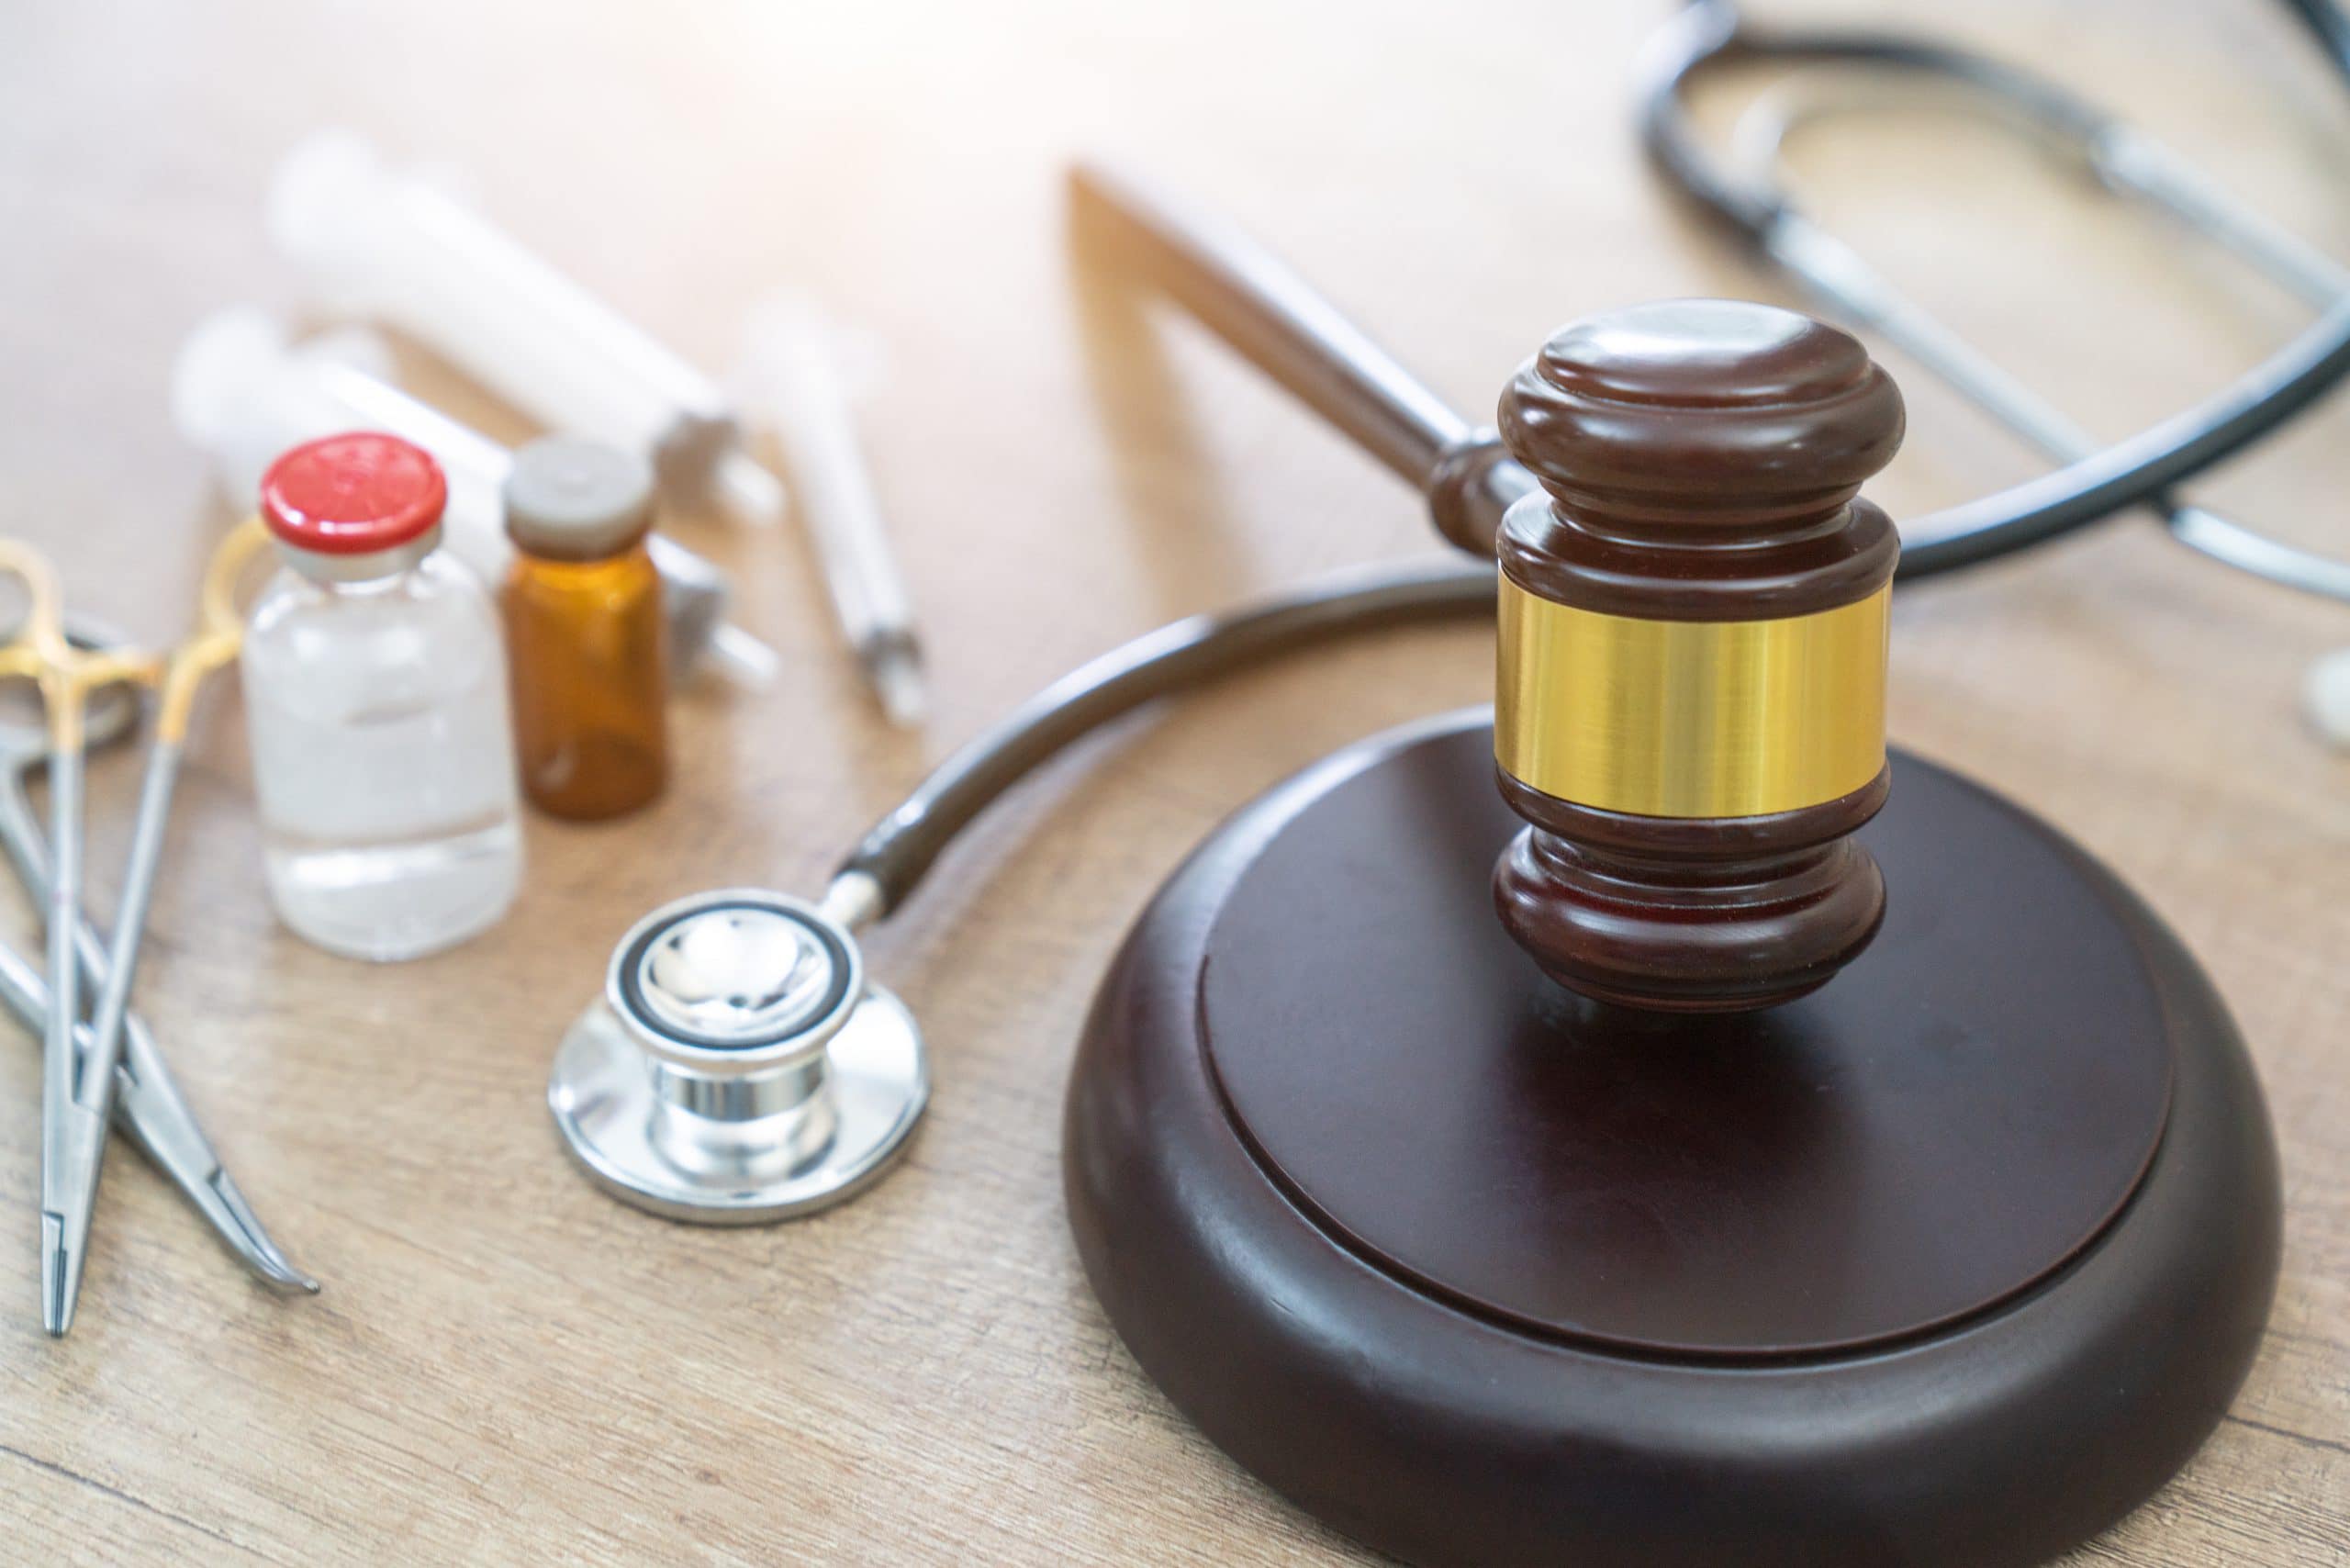 items related to medical malpractice image